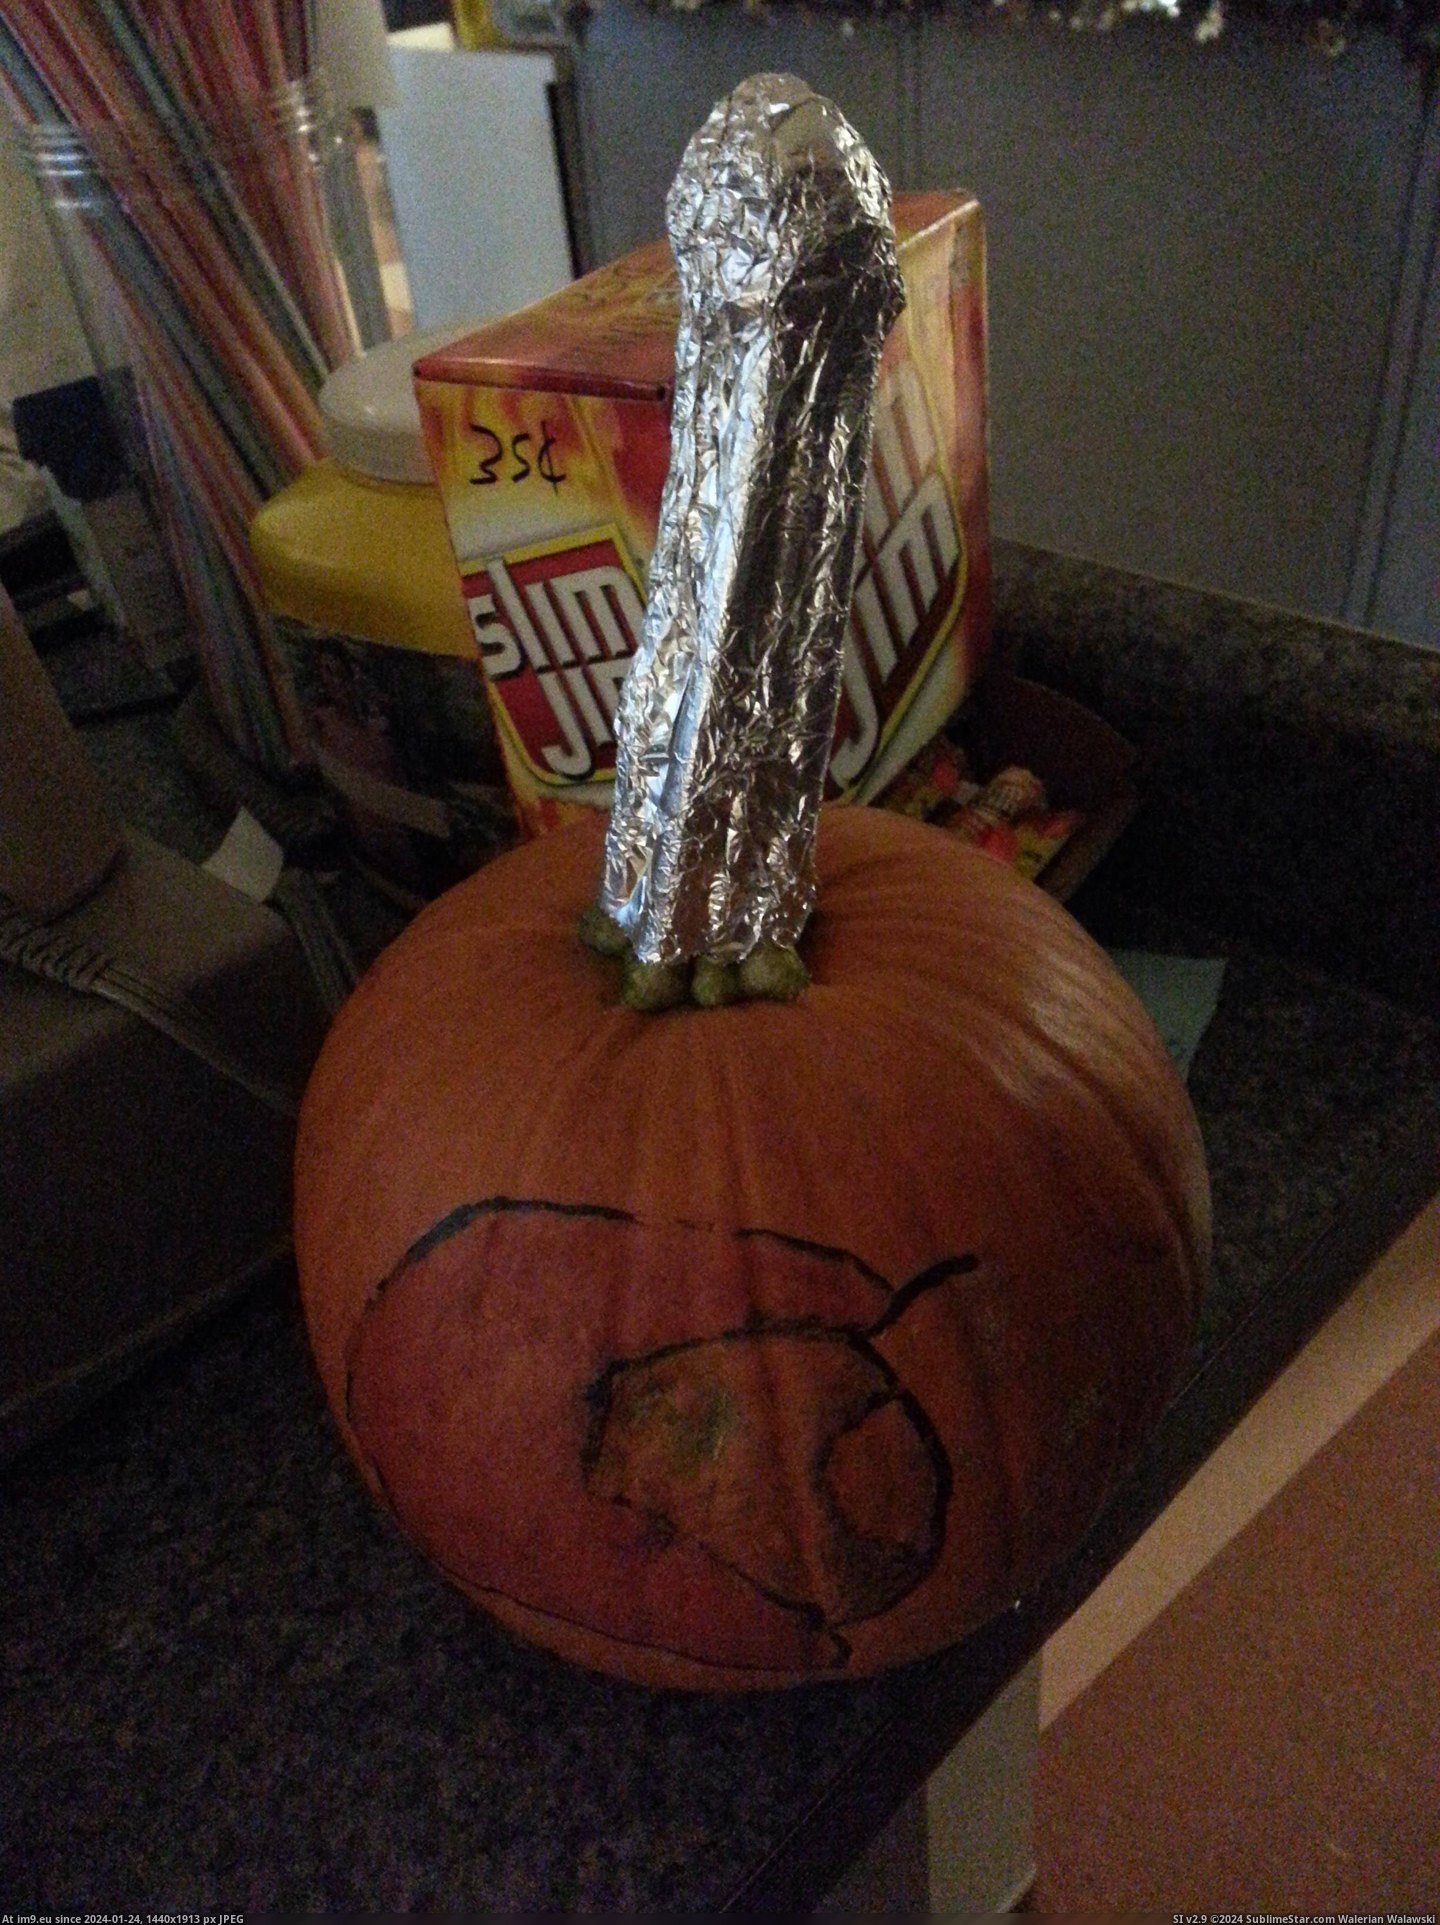 #Wtf #School #Pumpkin #Room #Lunch [Wtf] My school has this pumpkin by the register in the lunch room. Pic. (Obraz z album My r/WTF favs))